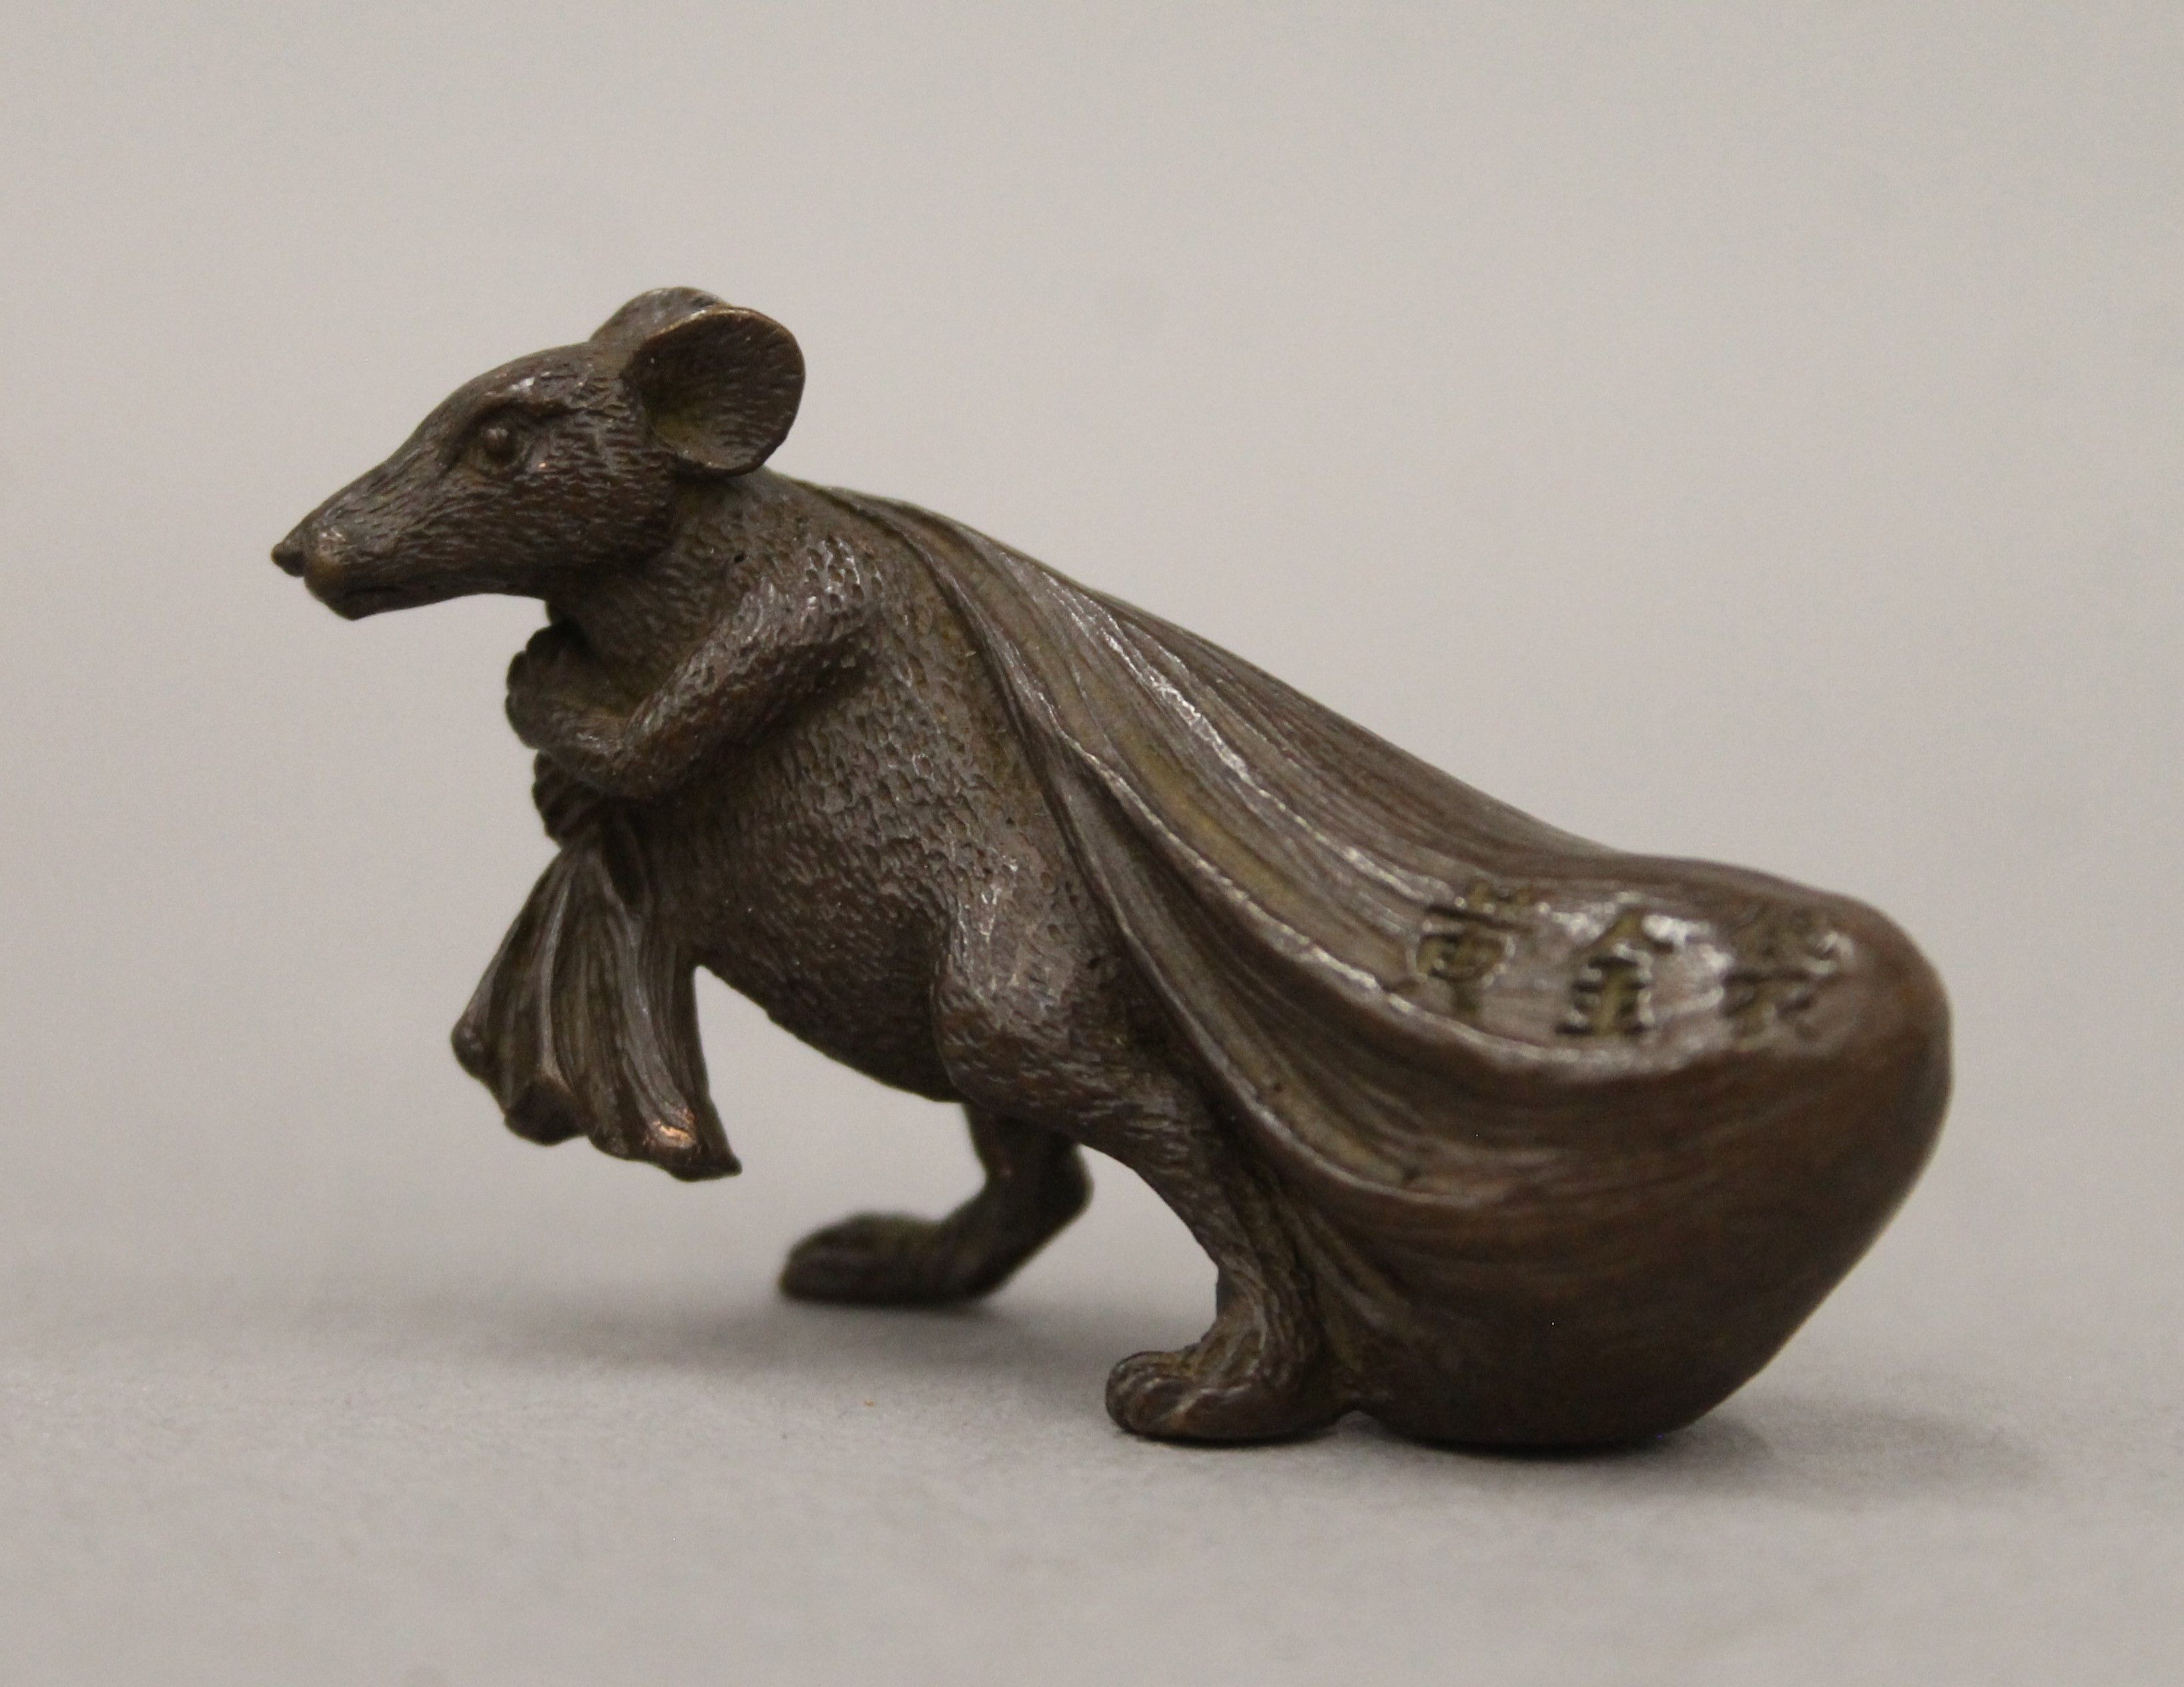 A bronze model of a rat carrying a bag. 3.5 cm high. - Image 2 of 5